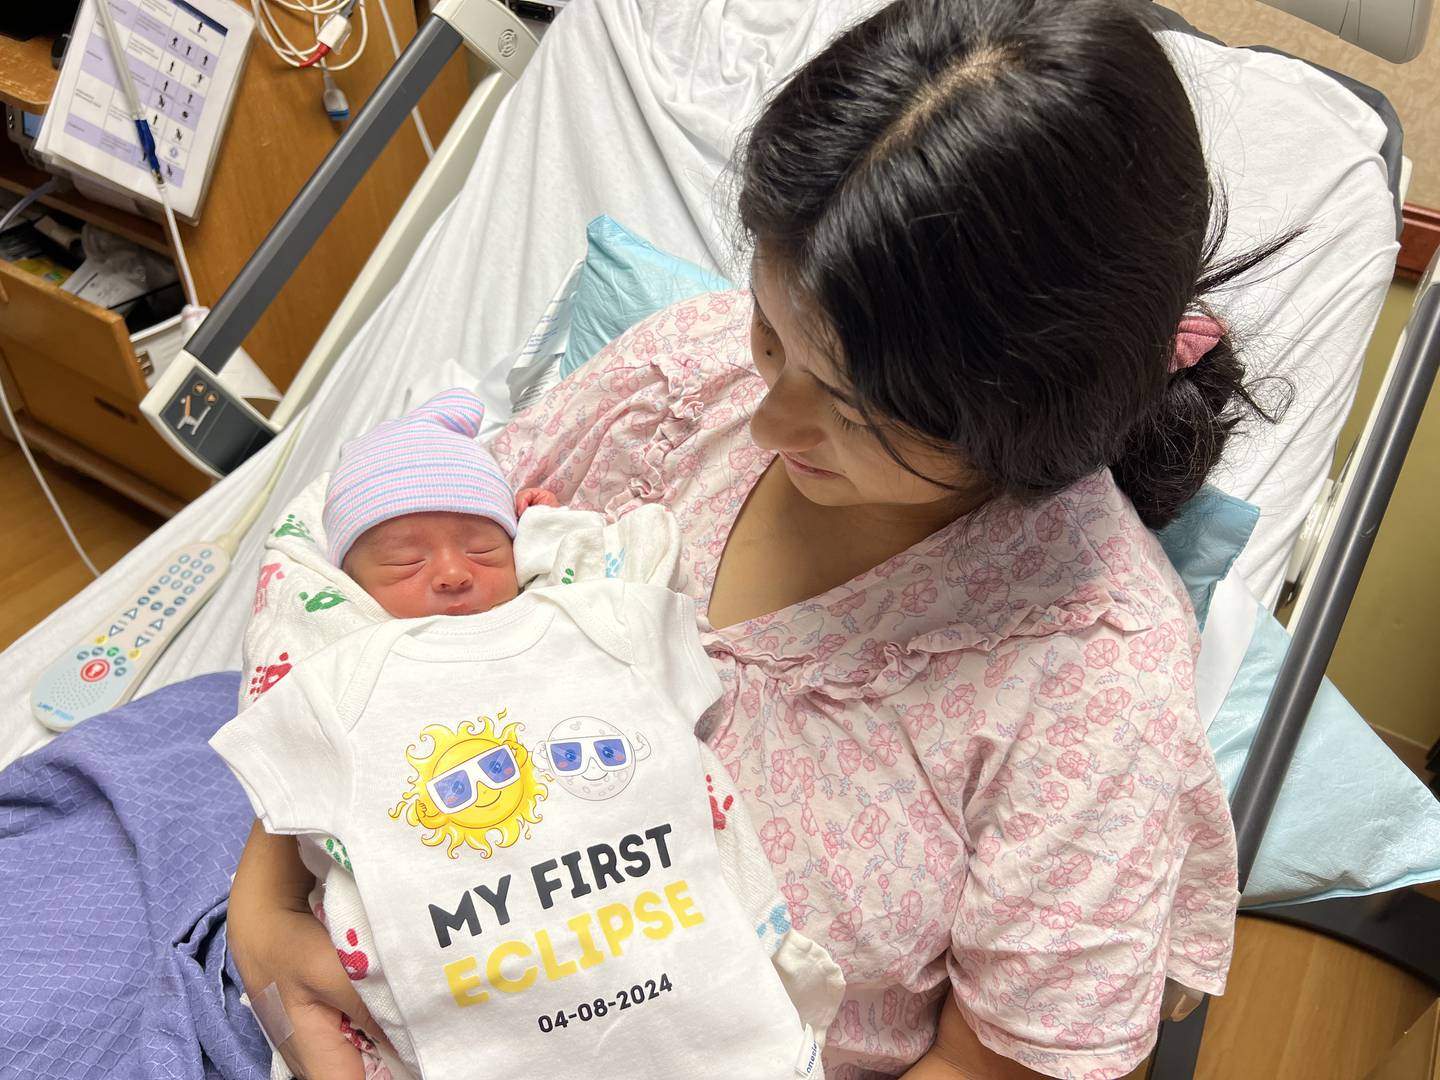 Mom Alexandra welcomed a baby boy at 7:29 a.m. on Monday, April 8, 2024, the day of the solar eclipse at Northwestern Medicine Kishwaukee Hospital in DeKalb. Hospital nurses gifted the parents with a special eclipse onsie to mark the occasion.